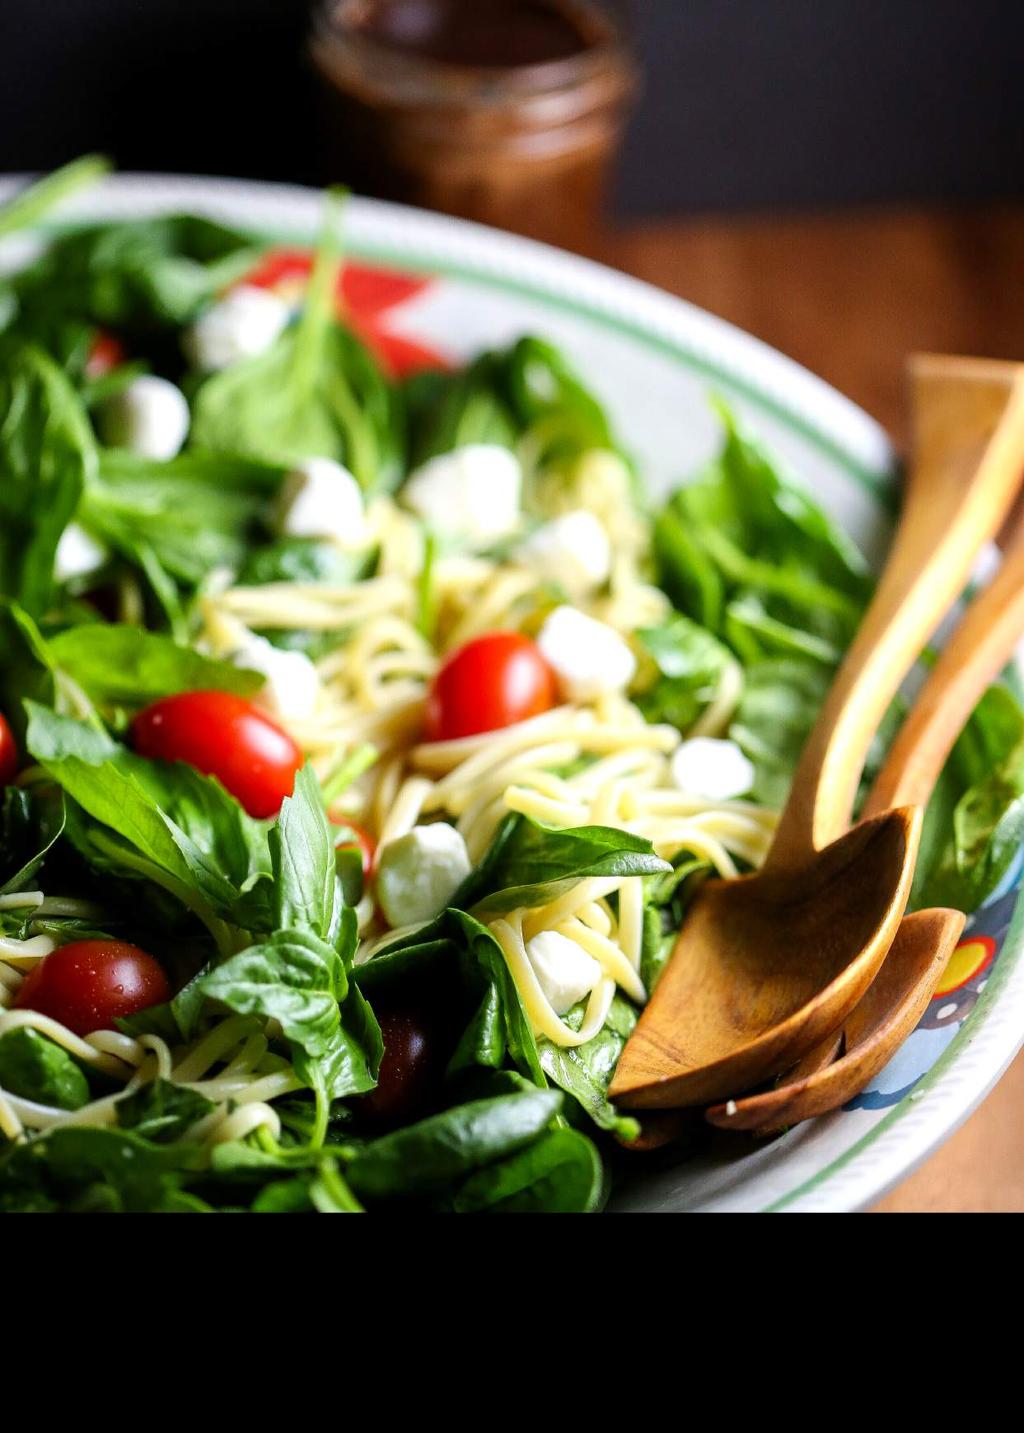 B R U S C H E T T A S A L A D For the Salad: 10-12 ounces fresh baby spinach 1 10-ounce container grape tomatoes, washed 1 8-ounce package fresh Mozzarella pearls 1/2 cup fresh basil leaves, chopped